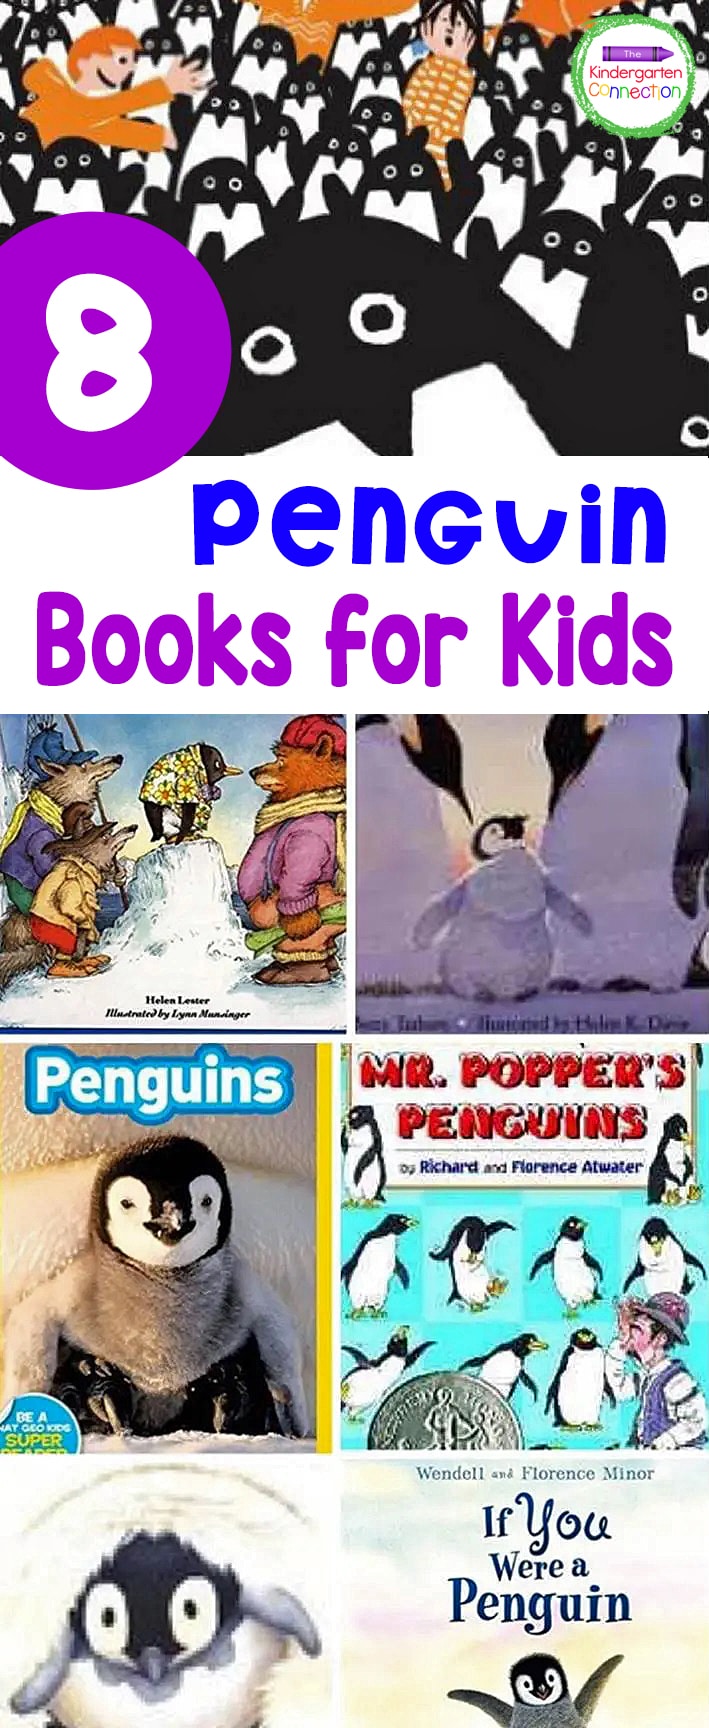 These awesome penguin books for kids are so fun for winter read alouds or as supplements to penguin activities in the classroom! 